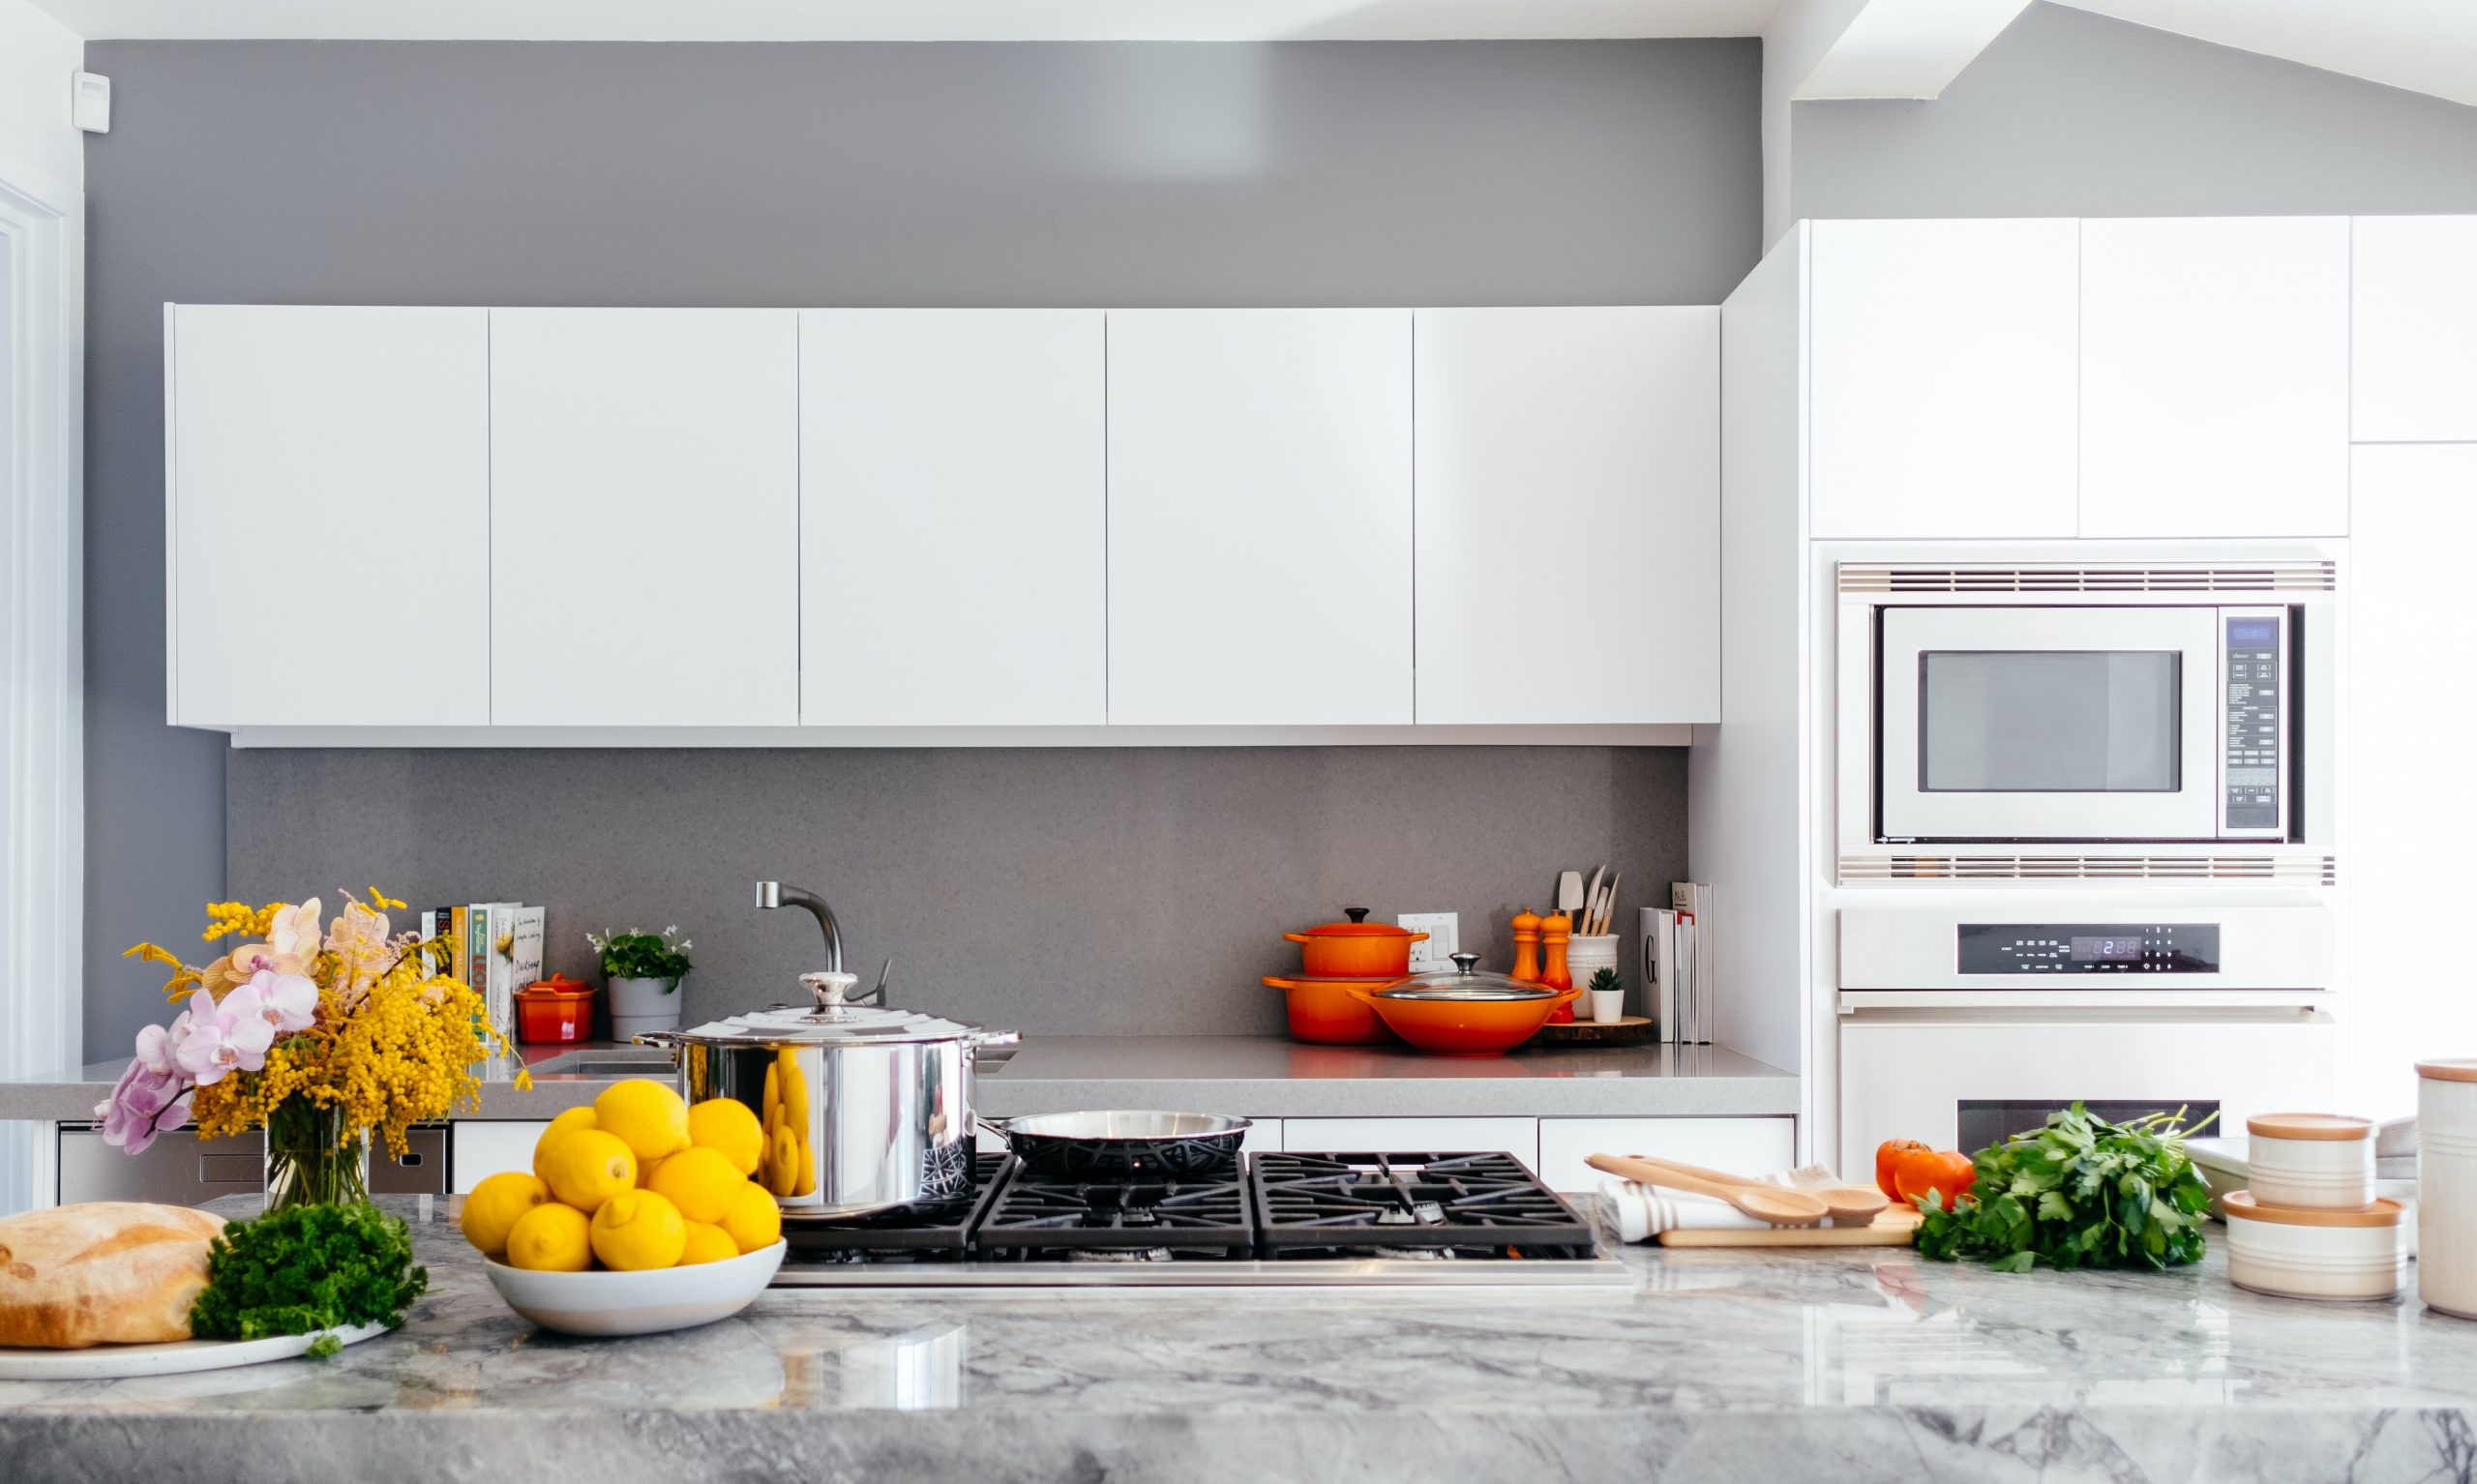 5 Biggest Mistakes People Make When Remodeling Their Kitchen